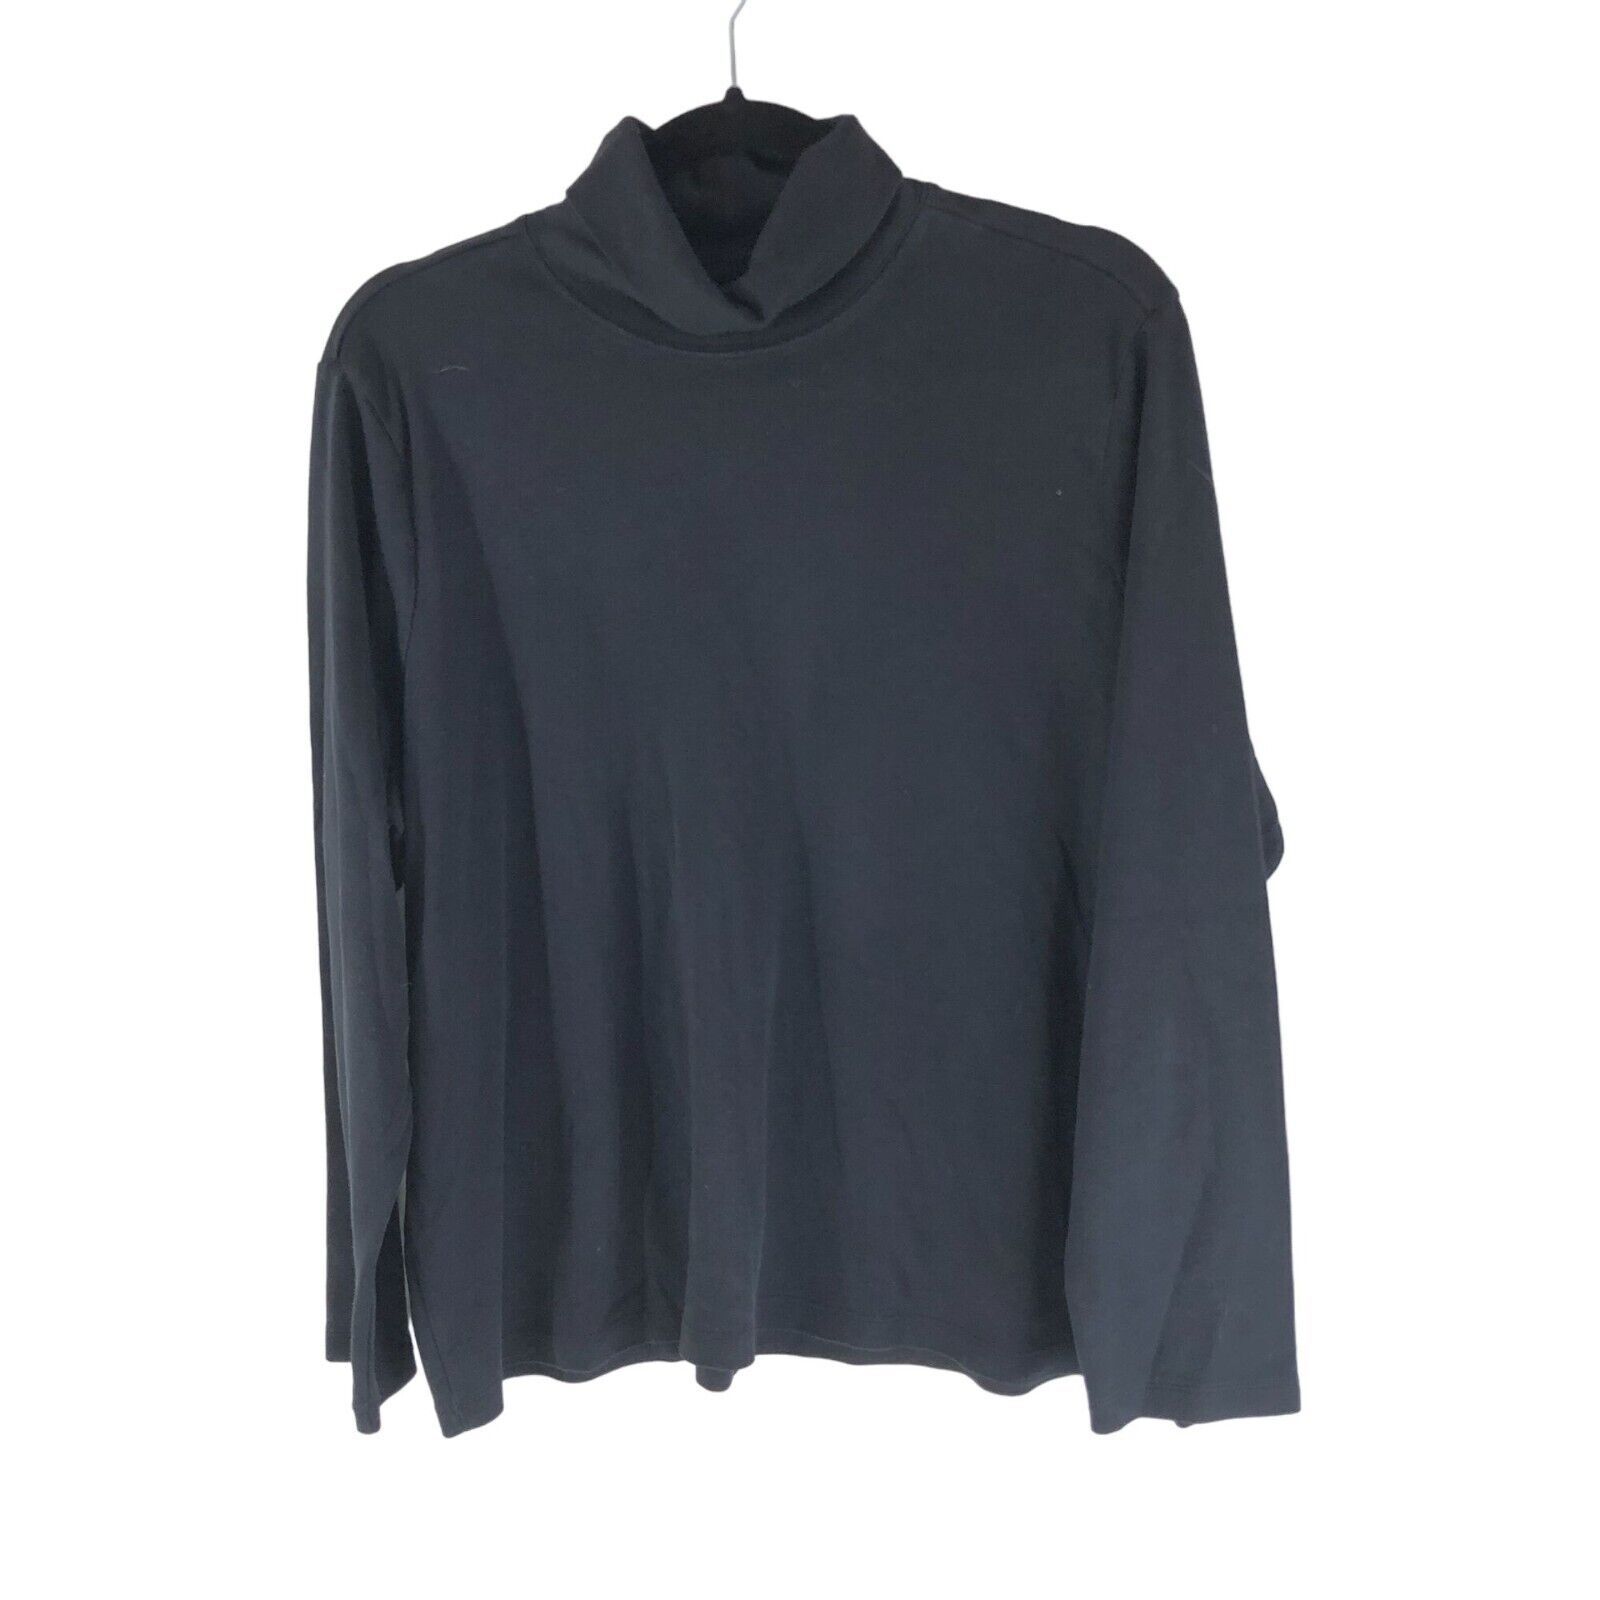 Primary image for LL Bean Womens Pima Cotton Turtleneck Top Long-Sleeve Black 1X